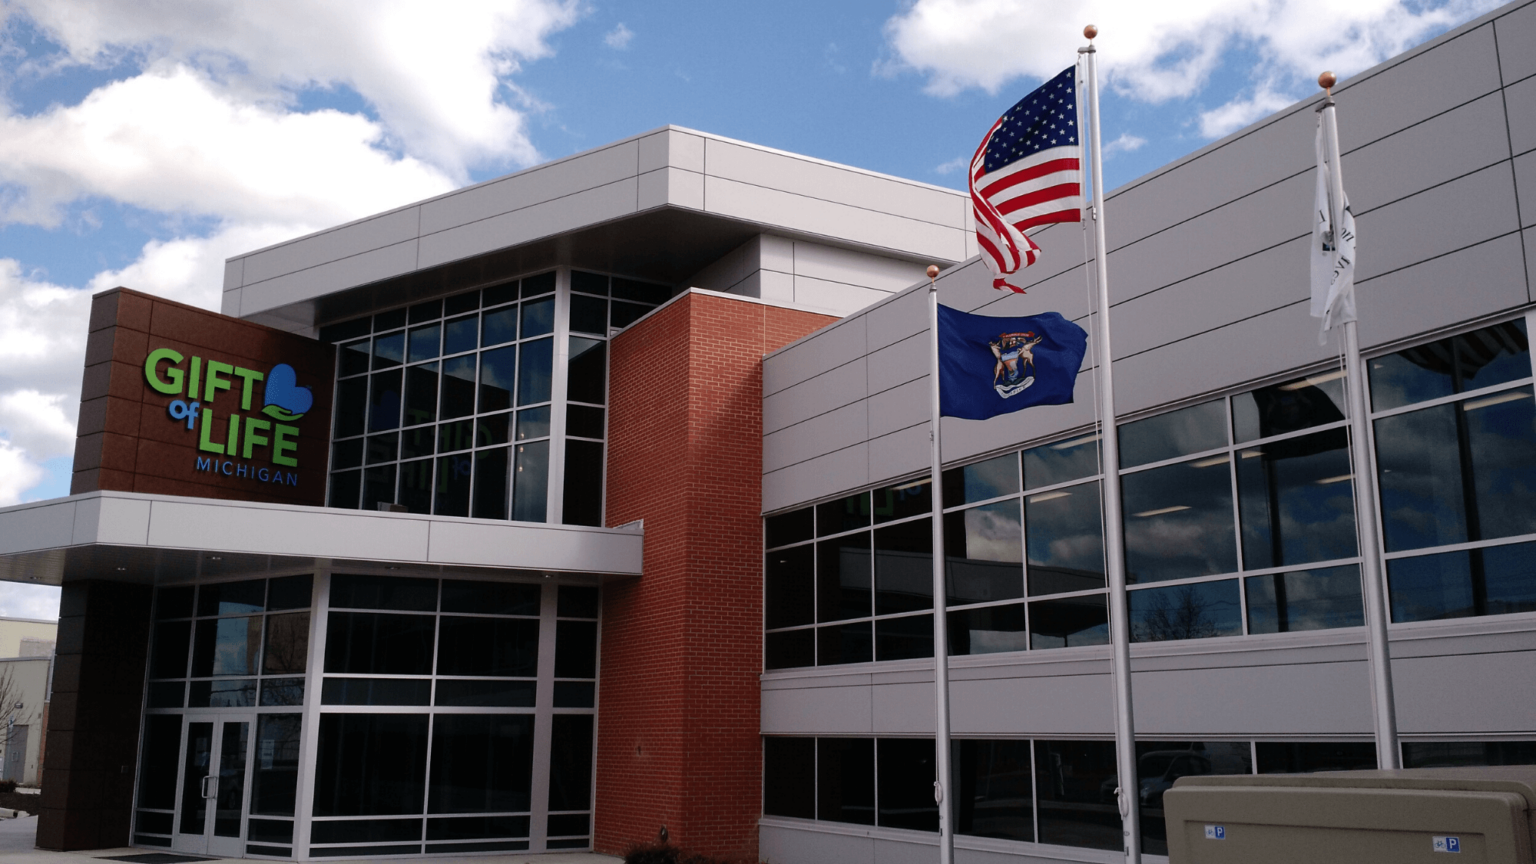 Two-story office building with lots of windows, an American flag and Donate Life flag in front, and the Gift of Life Michigan logo above the entry